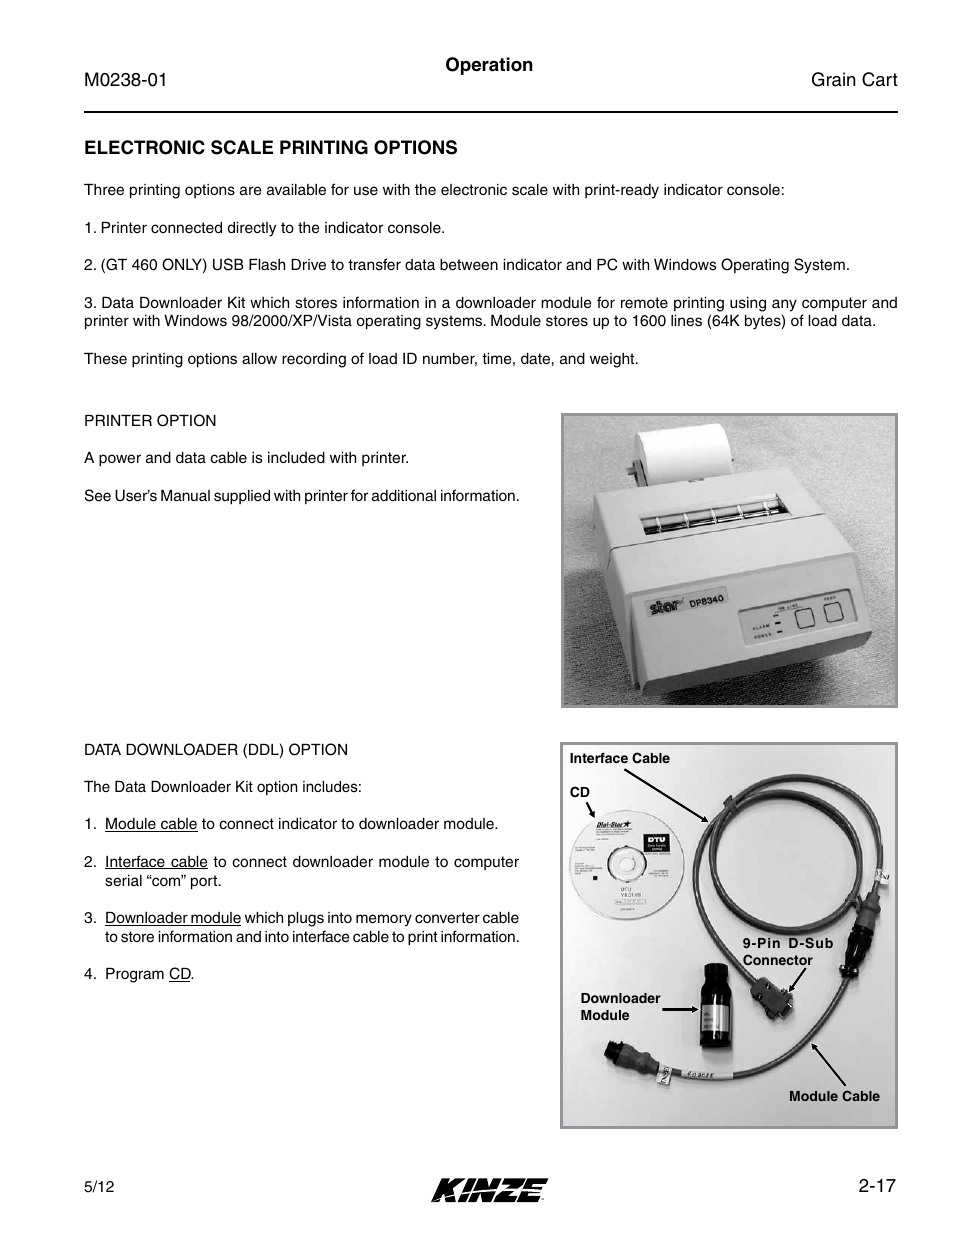 Electronic scale printing options, Electronic scale printing options -17 | Kinze Grain Carts Rev. 7/14 User Manual | Page 31 / 70